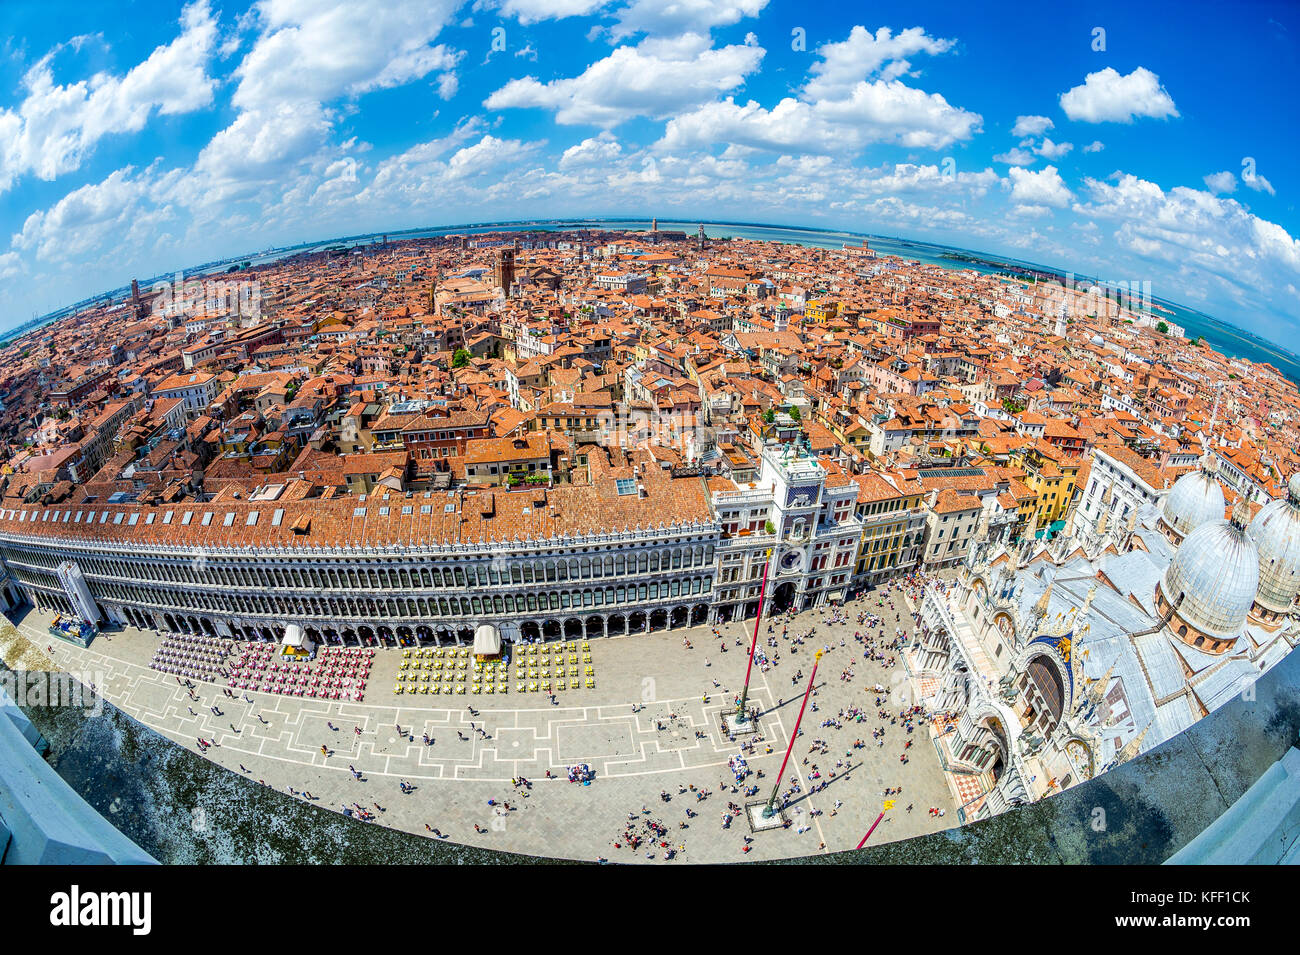 Aerial view of St Mark's Square (Piazza San Marco) in Venice, Italy. Fisheye lens perspective. Stock Photo